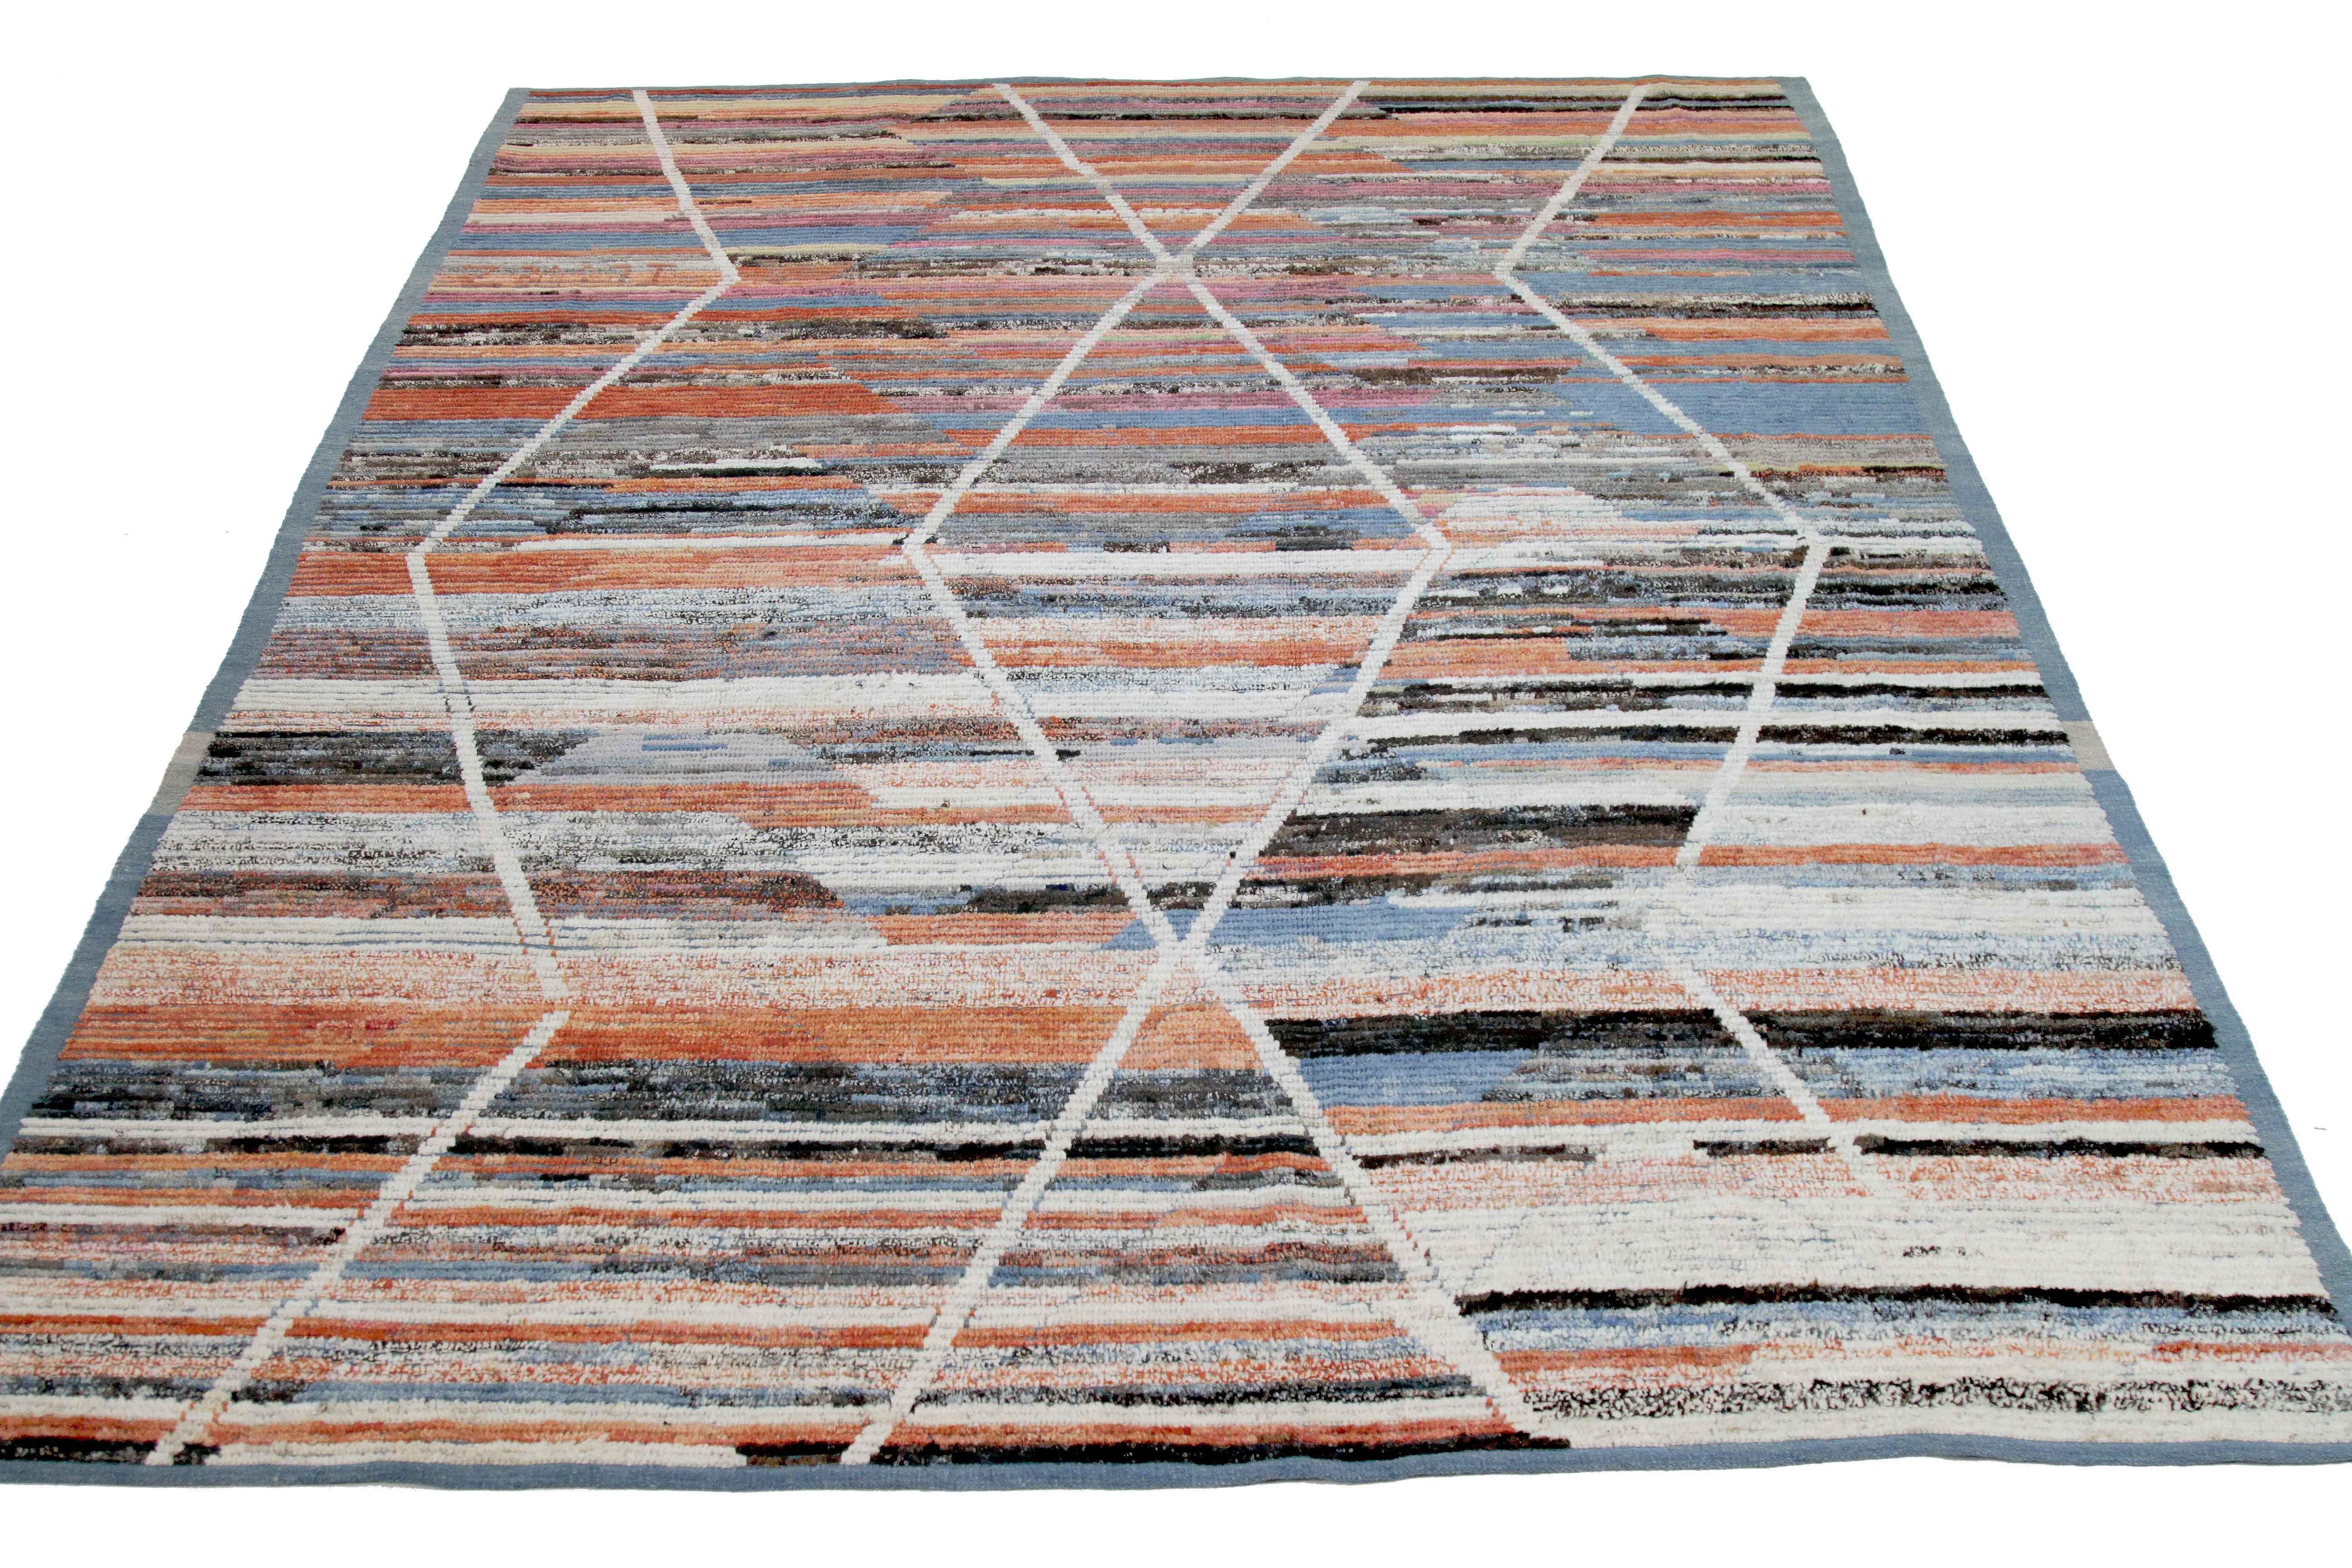 Modern Afghan rug handwoven from the finest sheep’s wool and colored with all-natural vegetable dyes that are safe for humans and pets. It’s a traditional Afghan weaving featuring a Moroccan inspired design highlighted by colored streaks and white